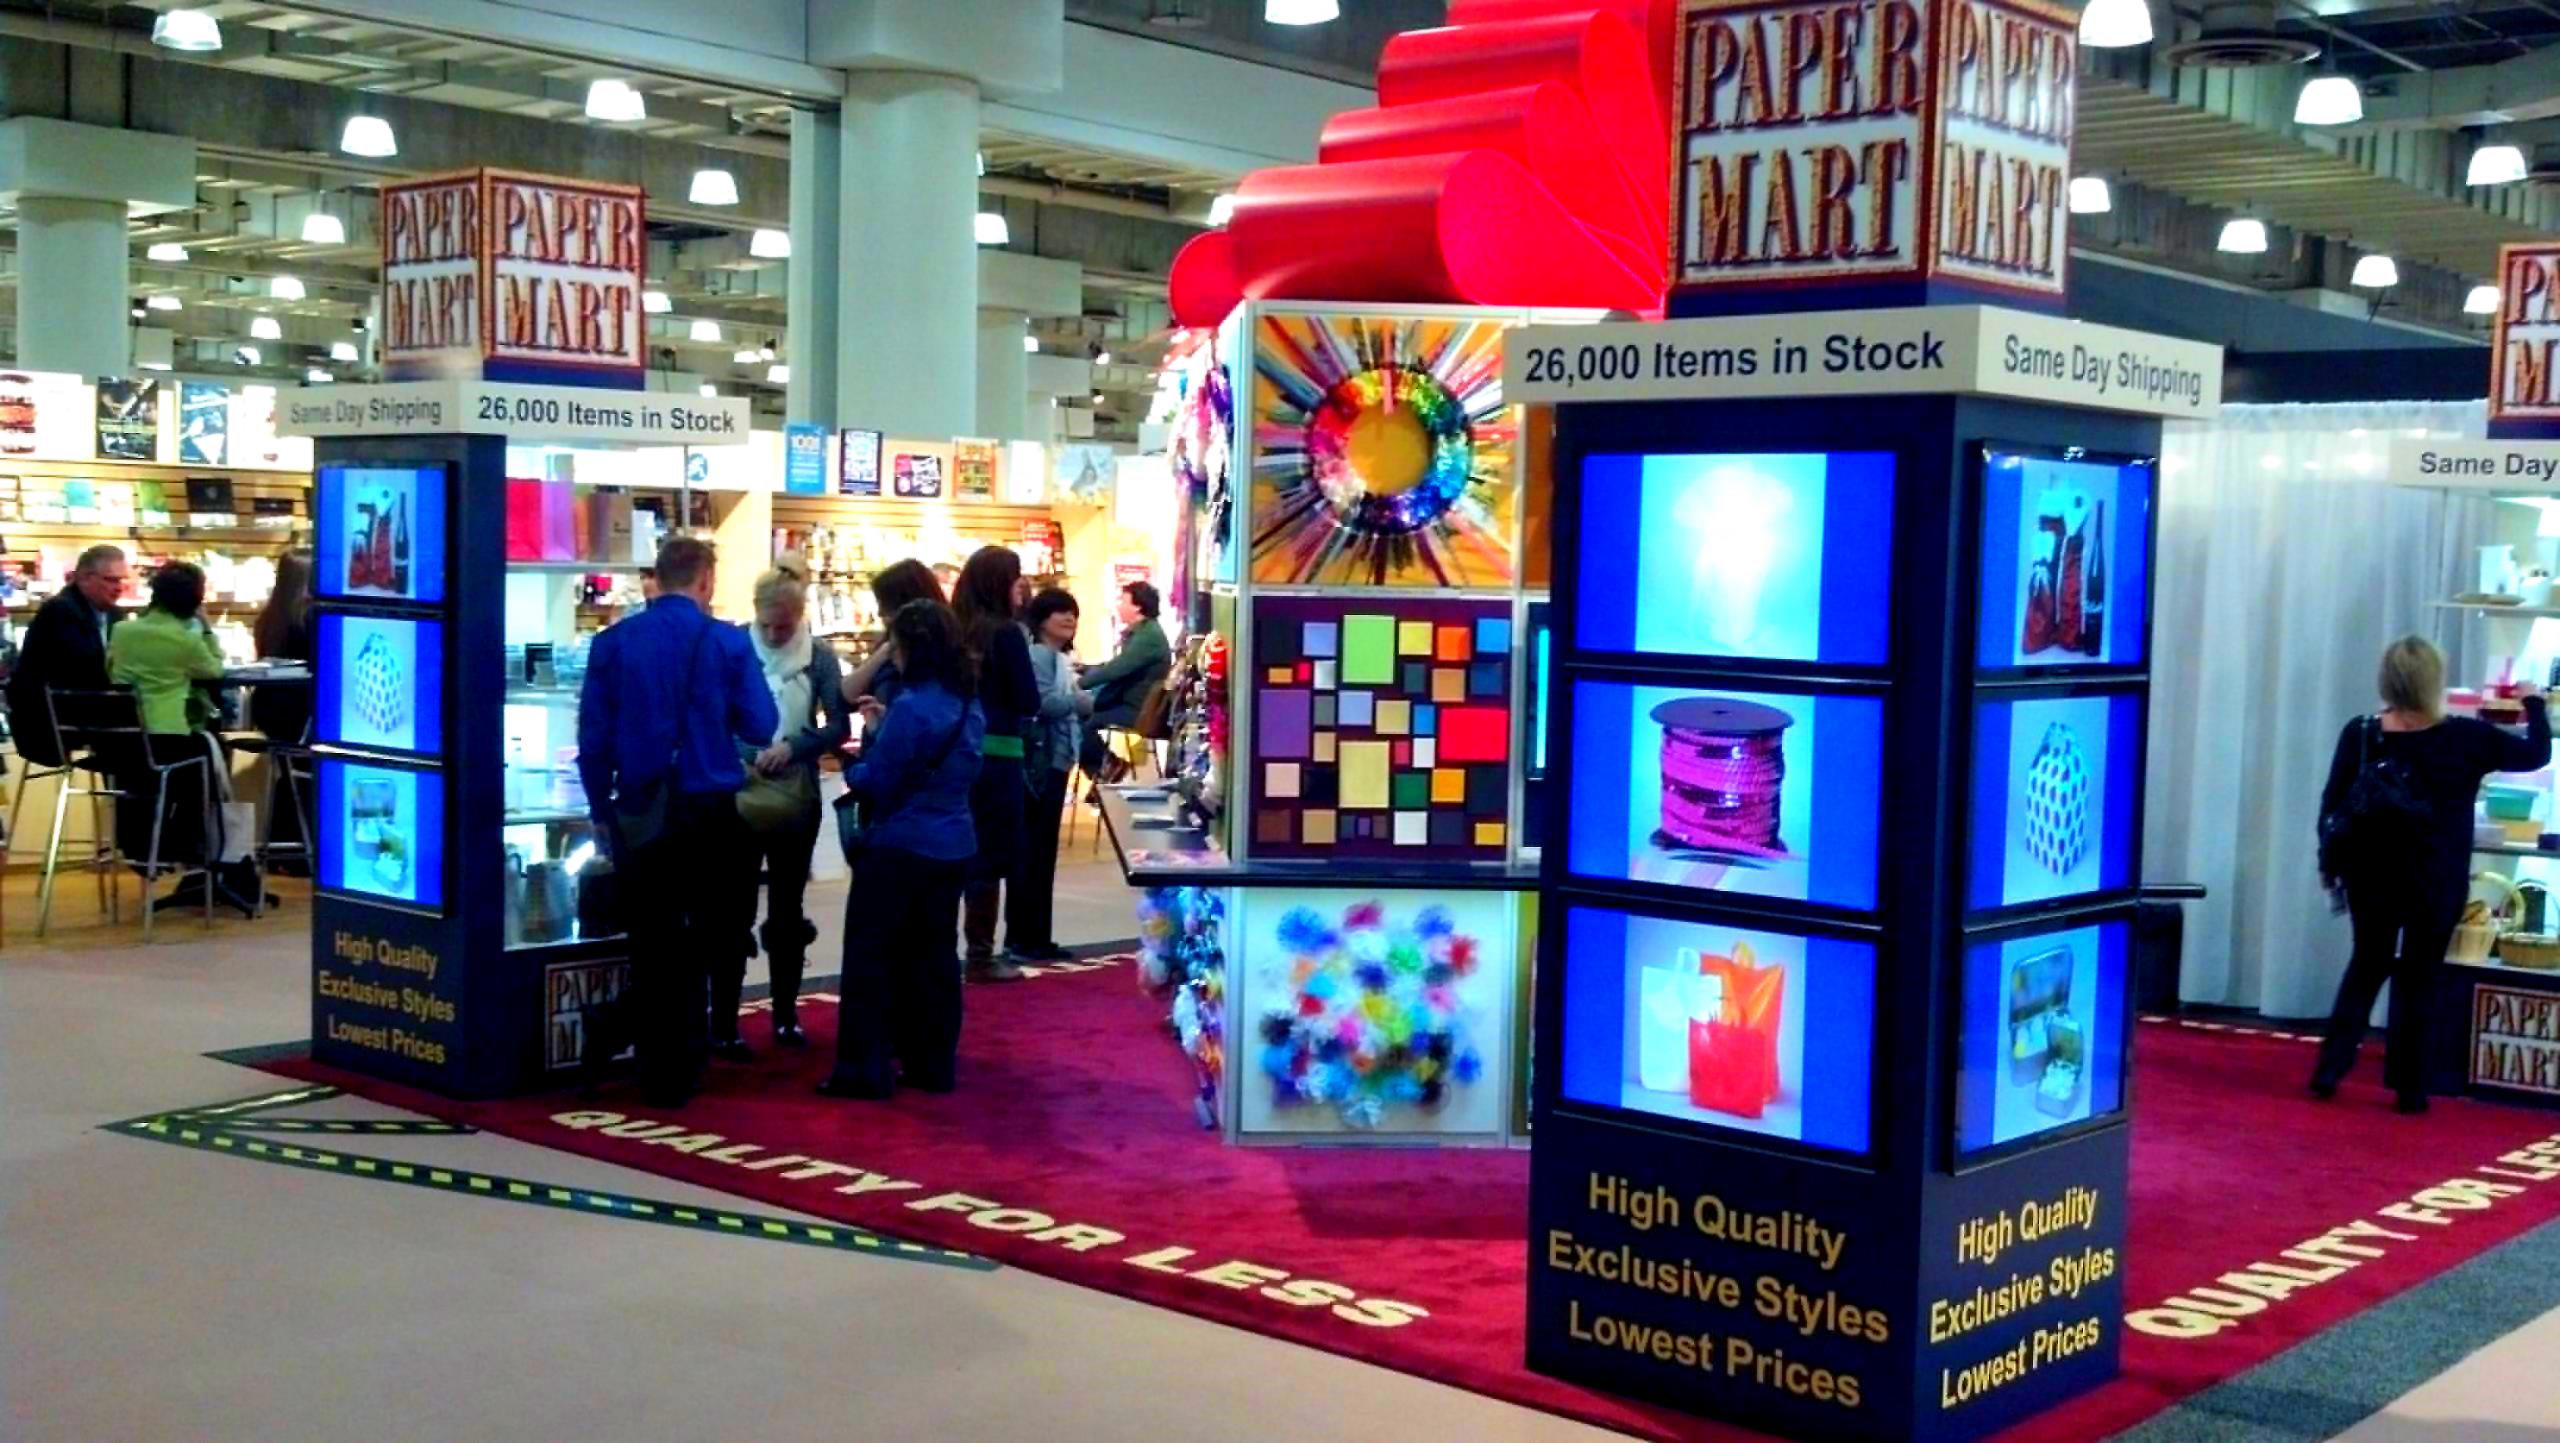 Paper Mart's Booth at Last Year's NY NOW will feature new products this year. Look for the giant gift box!